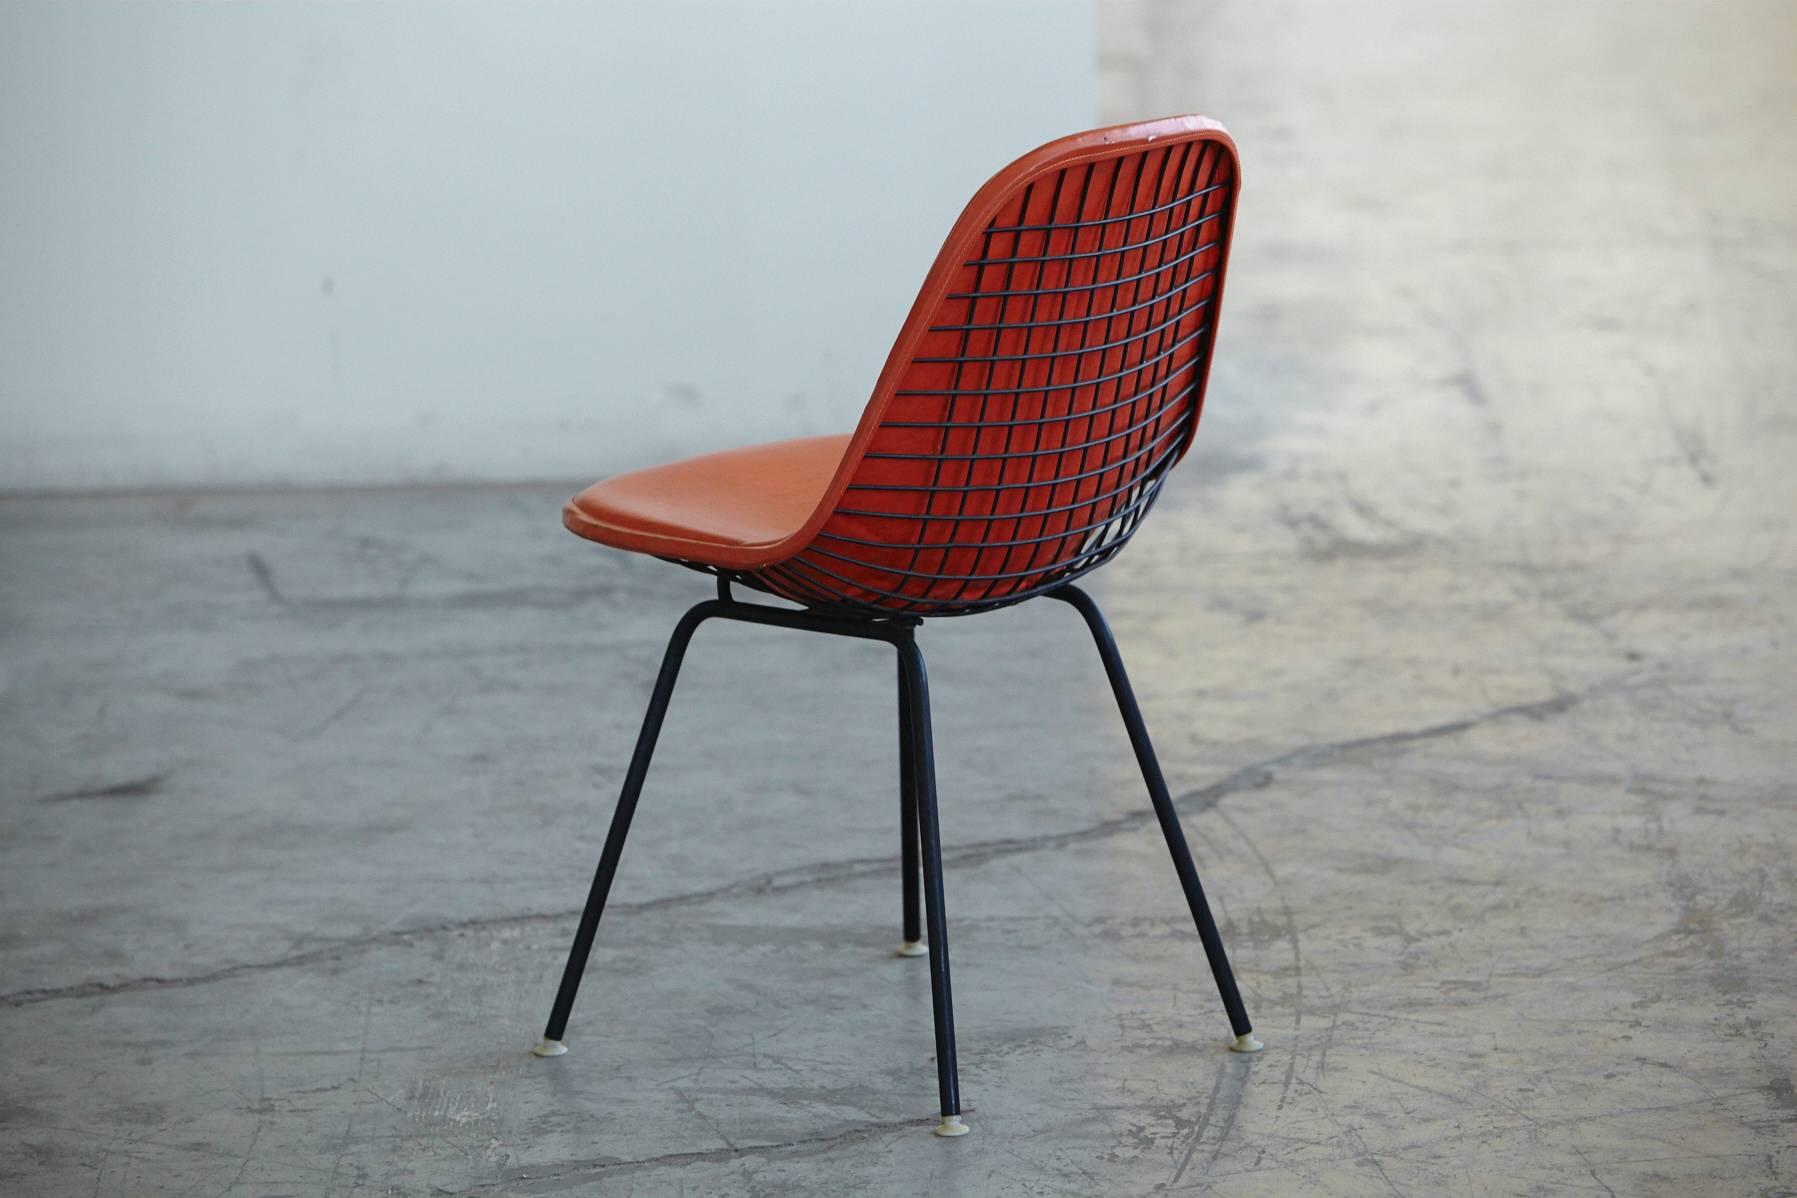 Mid-Century Modern Original Eames DKX-1 Side Chair in Orange Leather for Herman Miller, 1960s For Sale